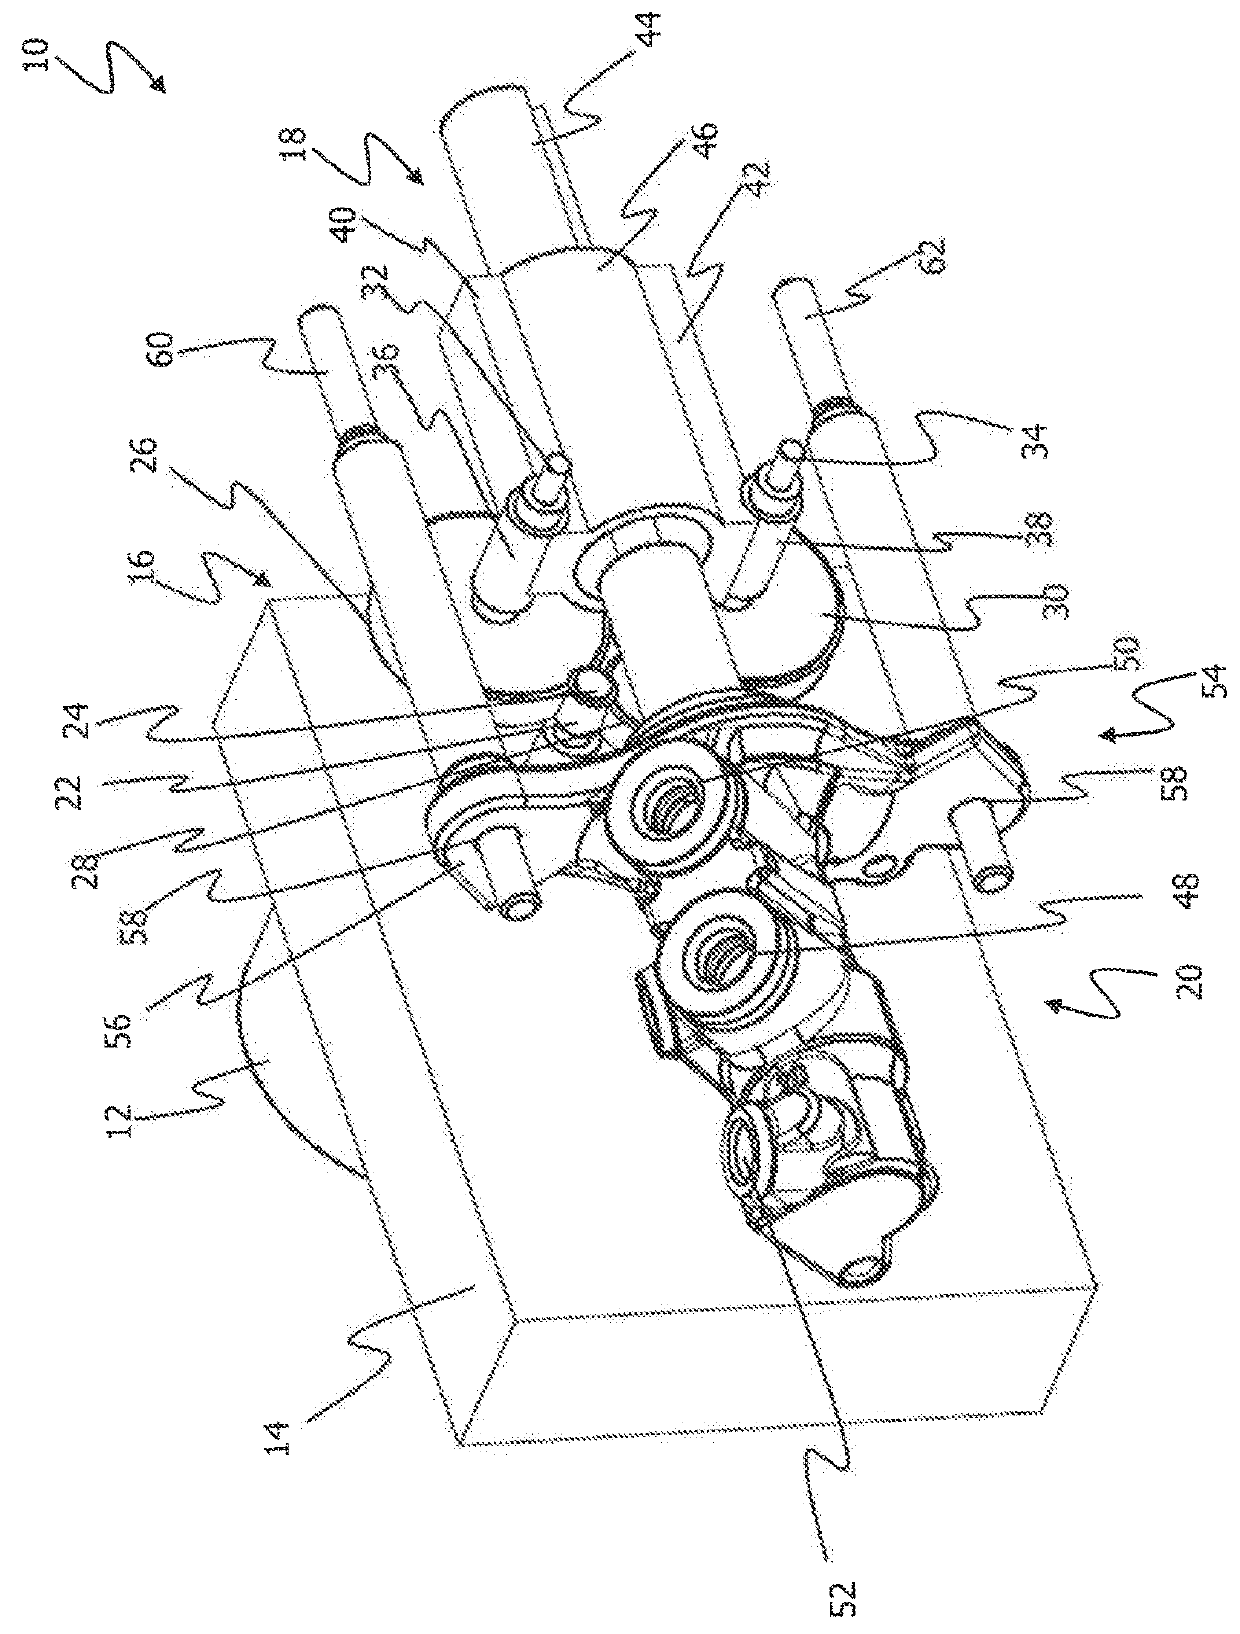 Assembly Having a Brake Cylinder and an Electromechanical Brake Booster